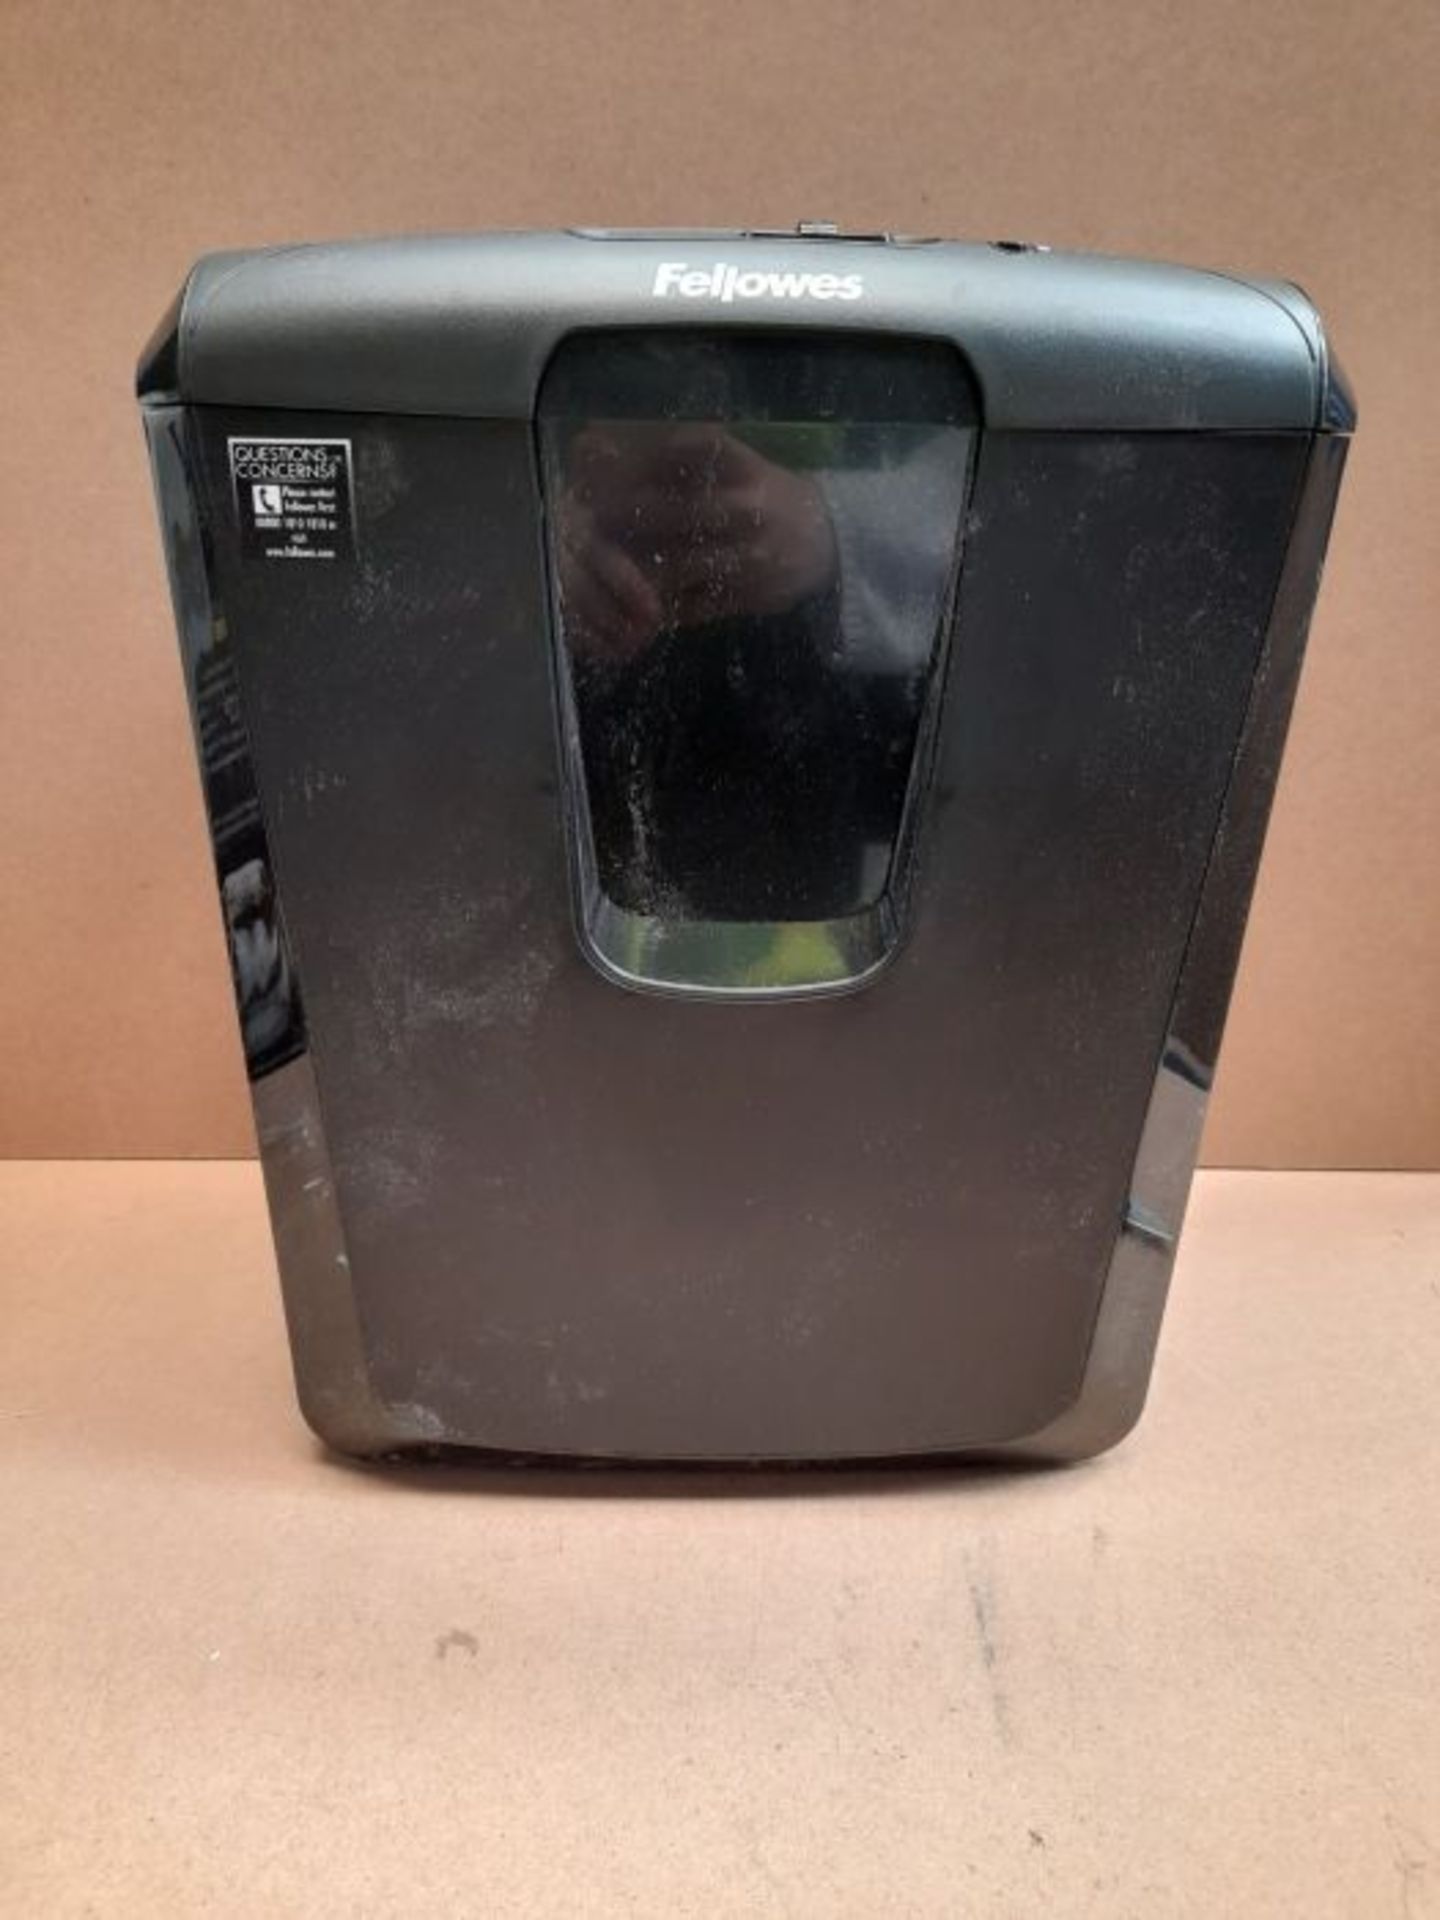 Fellowes Powershred M-8C 8 Sheet Cross Cut Personal Shredder with Safety Lock - Image 3 of 3